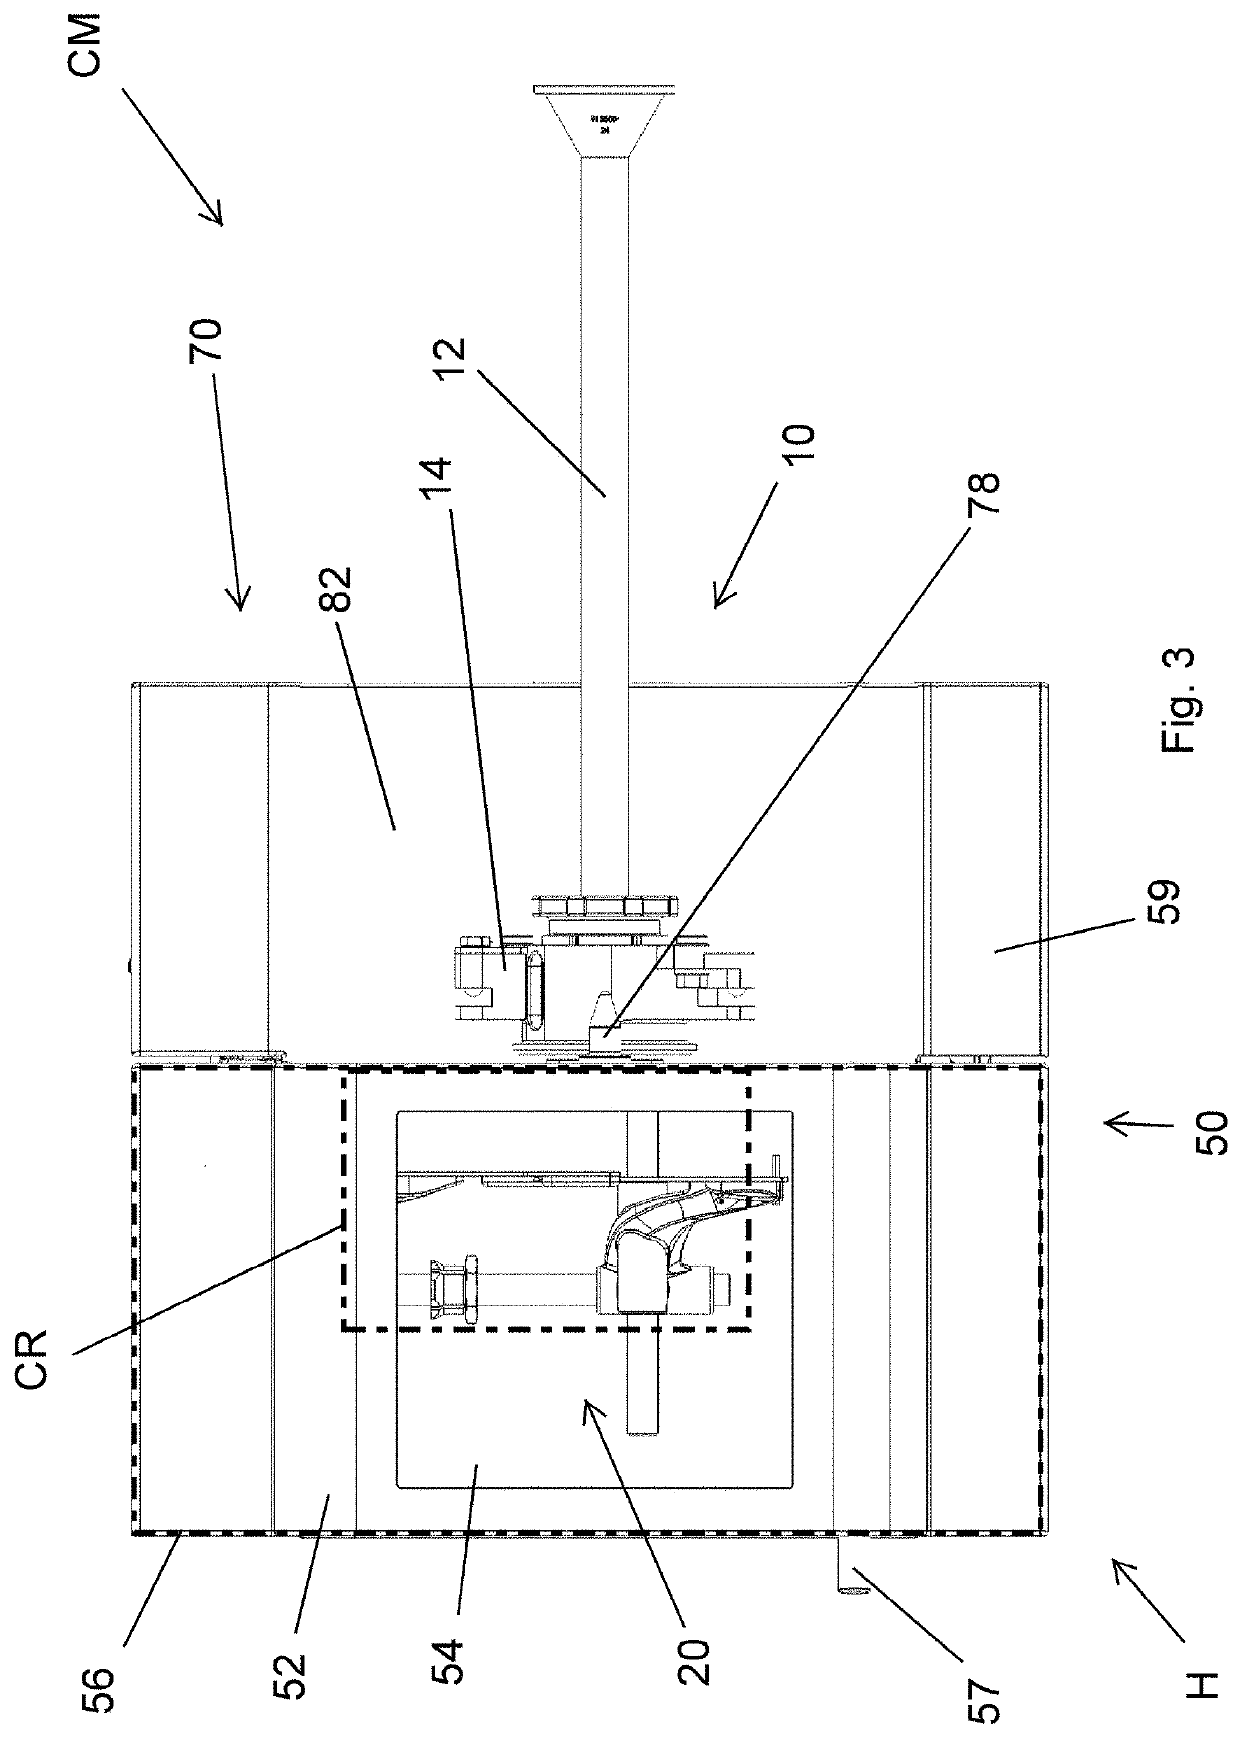 Clipping Machine with Secured Access to the Clipping Region